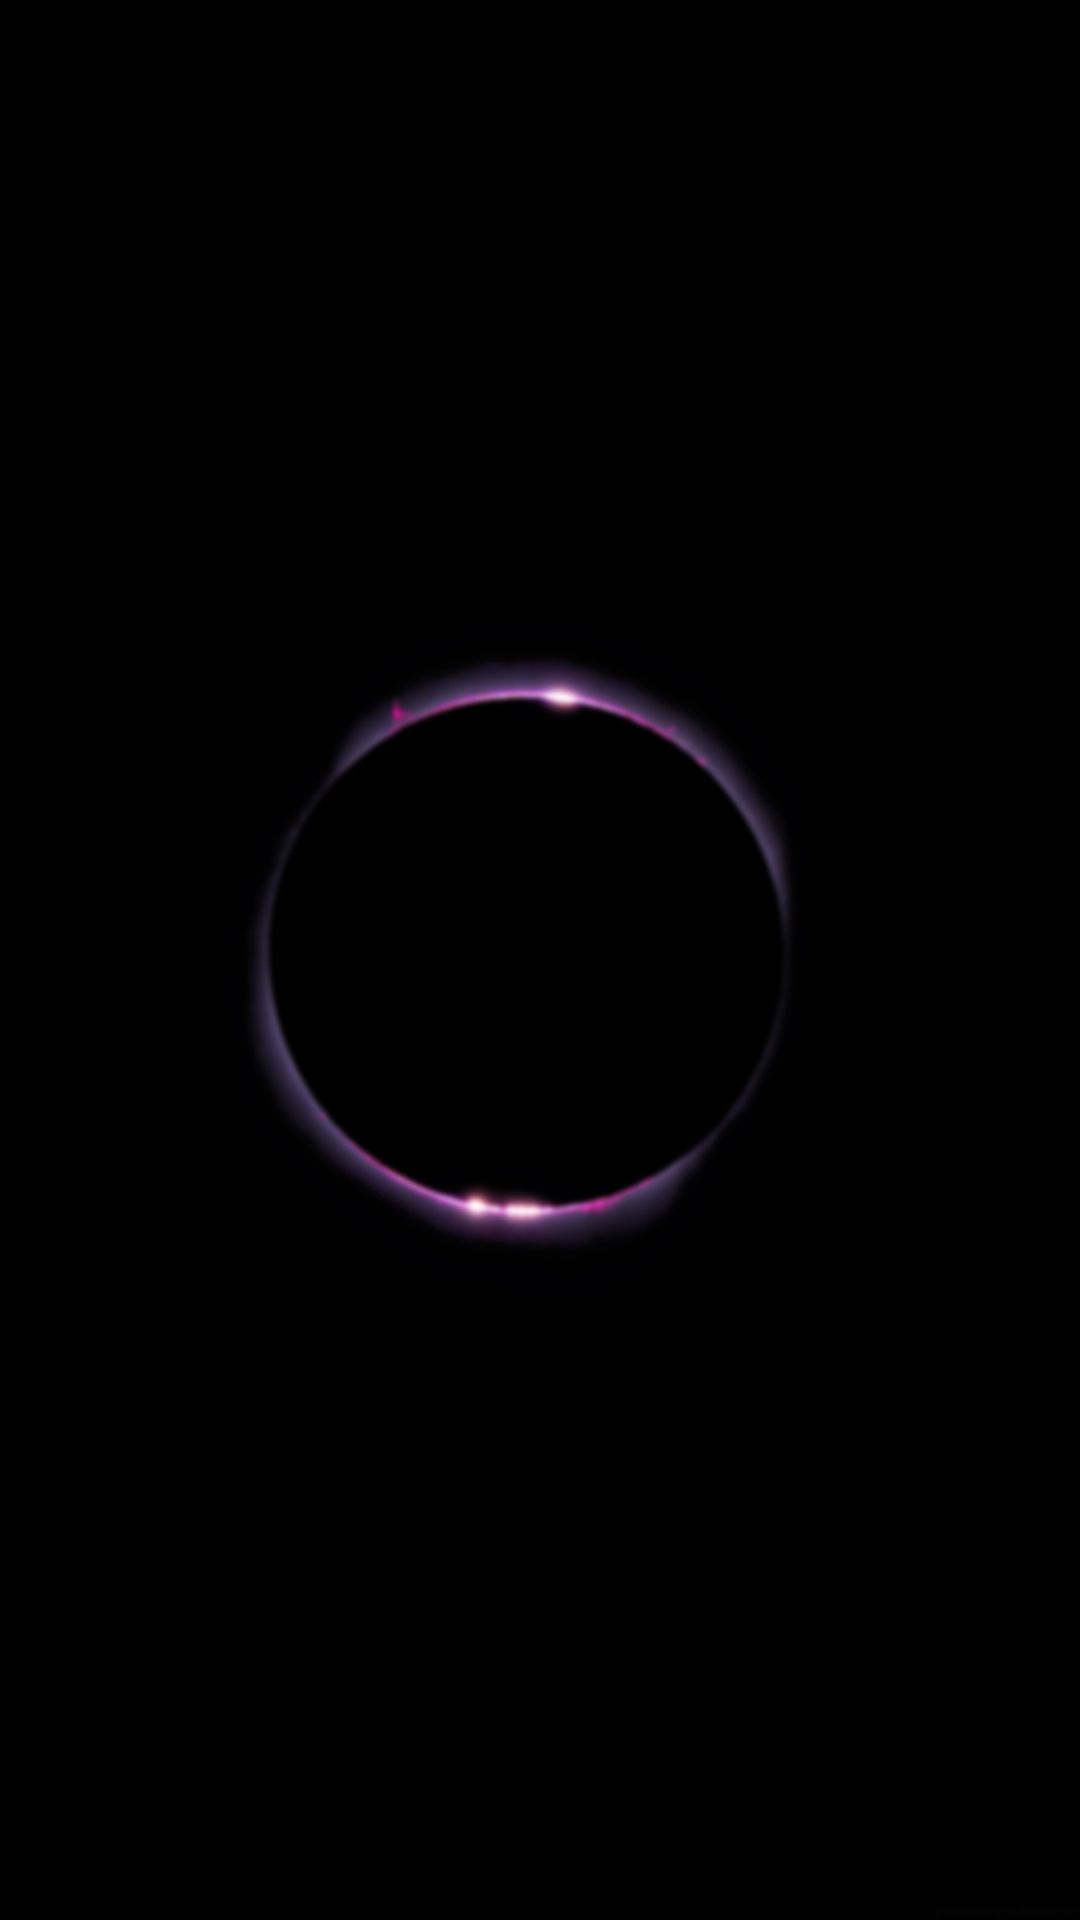 Eclipse iPhone Wallpaper, image collections of wallpaper